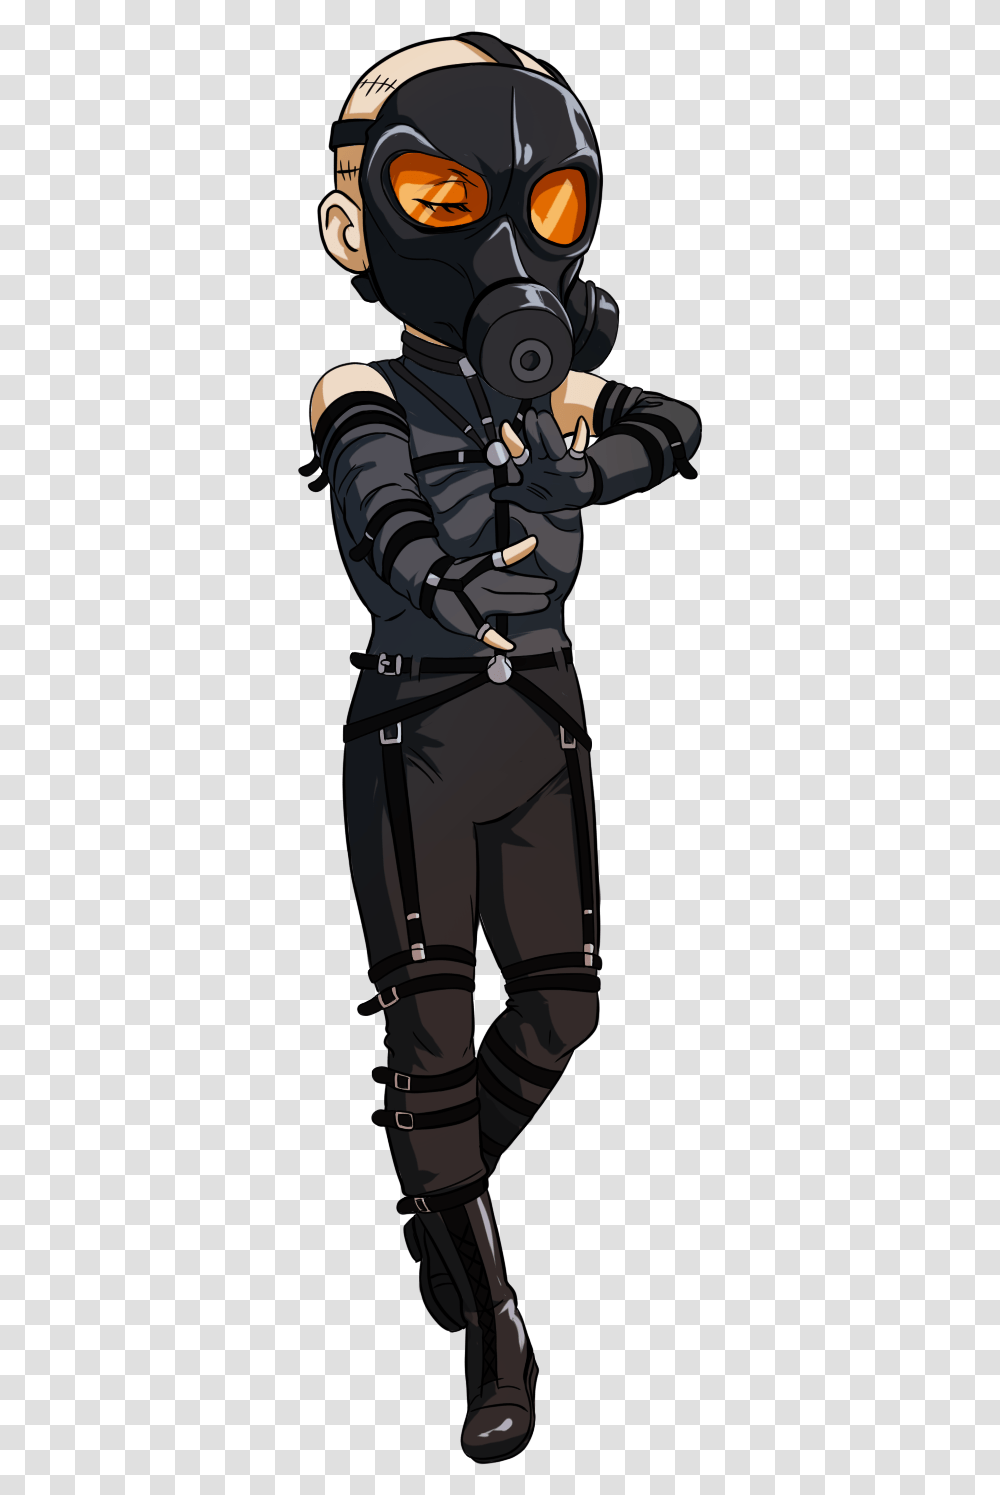 And Next Is Psycho Mantis Mgs Psycho Mantis Background, Ninja, Helmet, Person Transparent Png